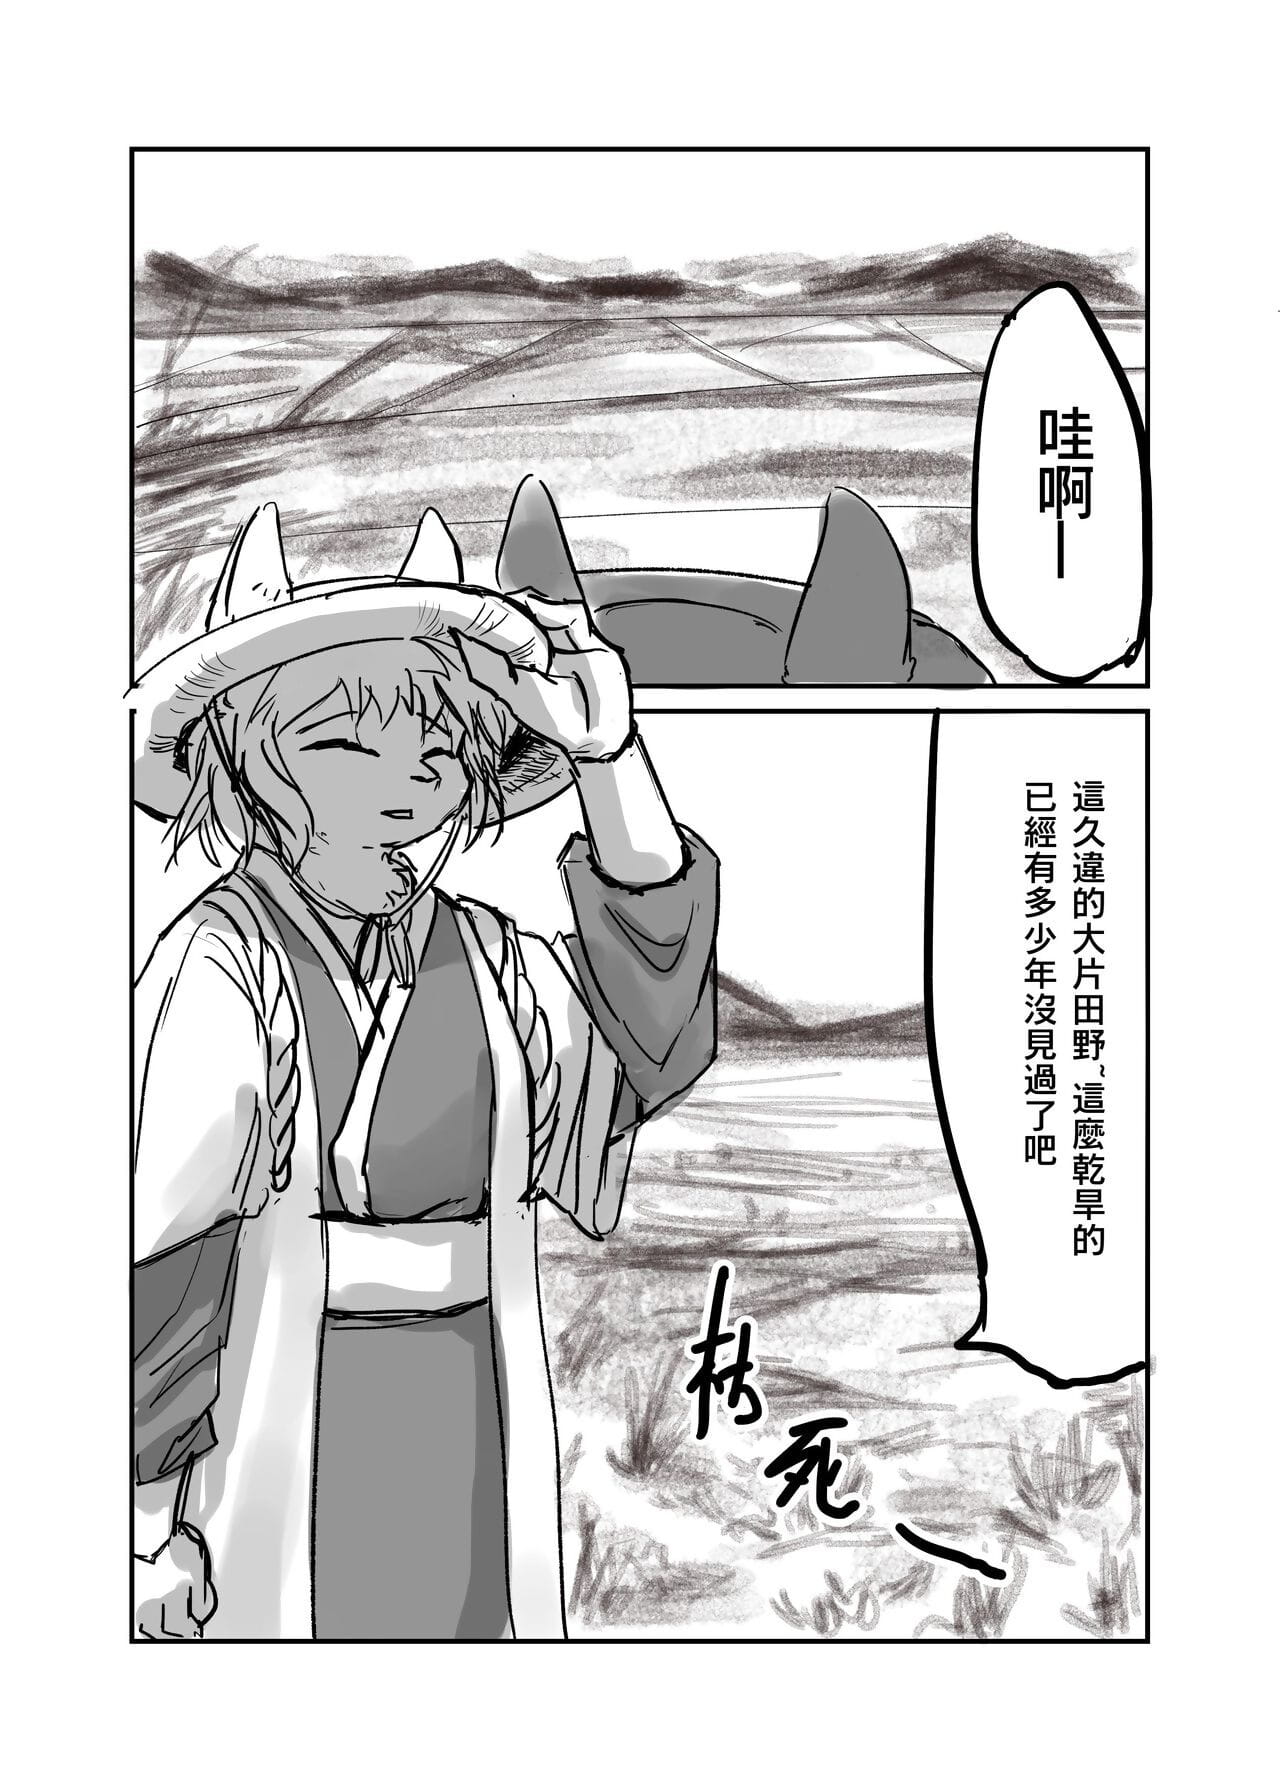 （the Besucher 他乡之人 by：鬼流 page 1